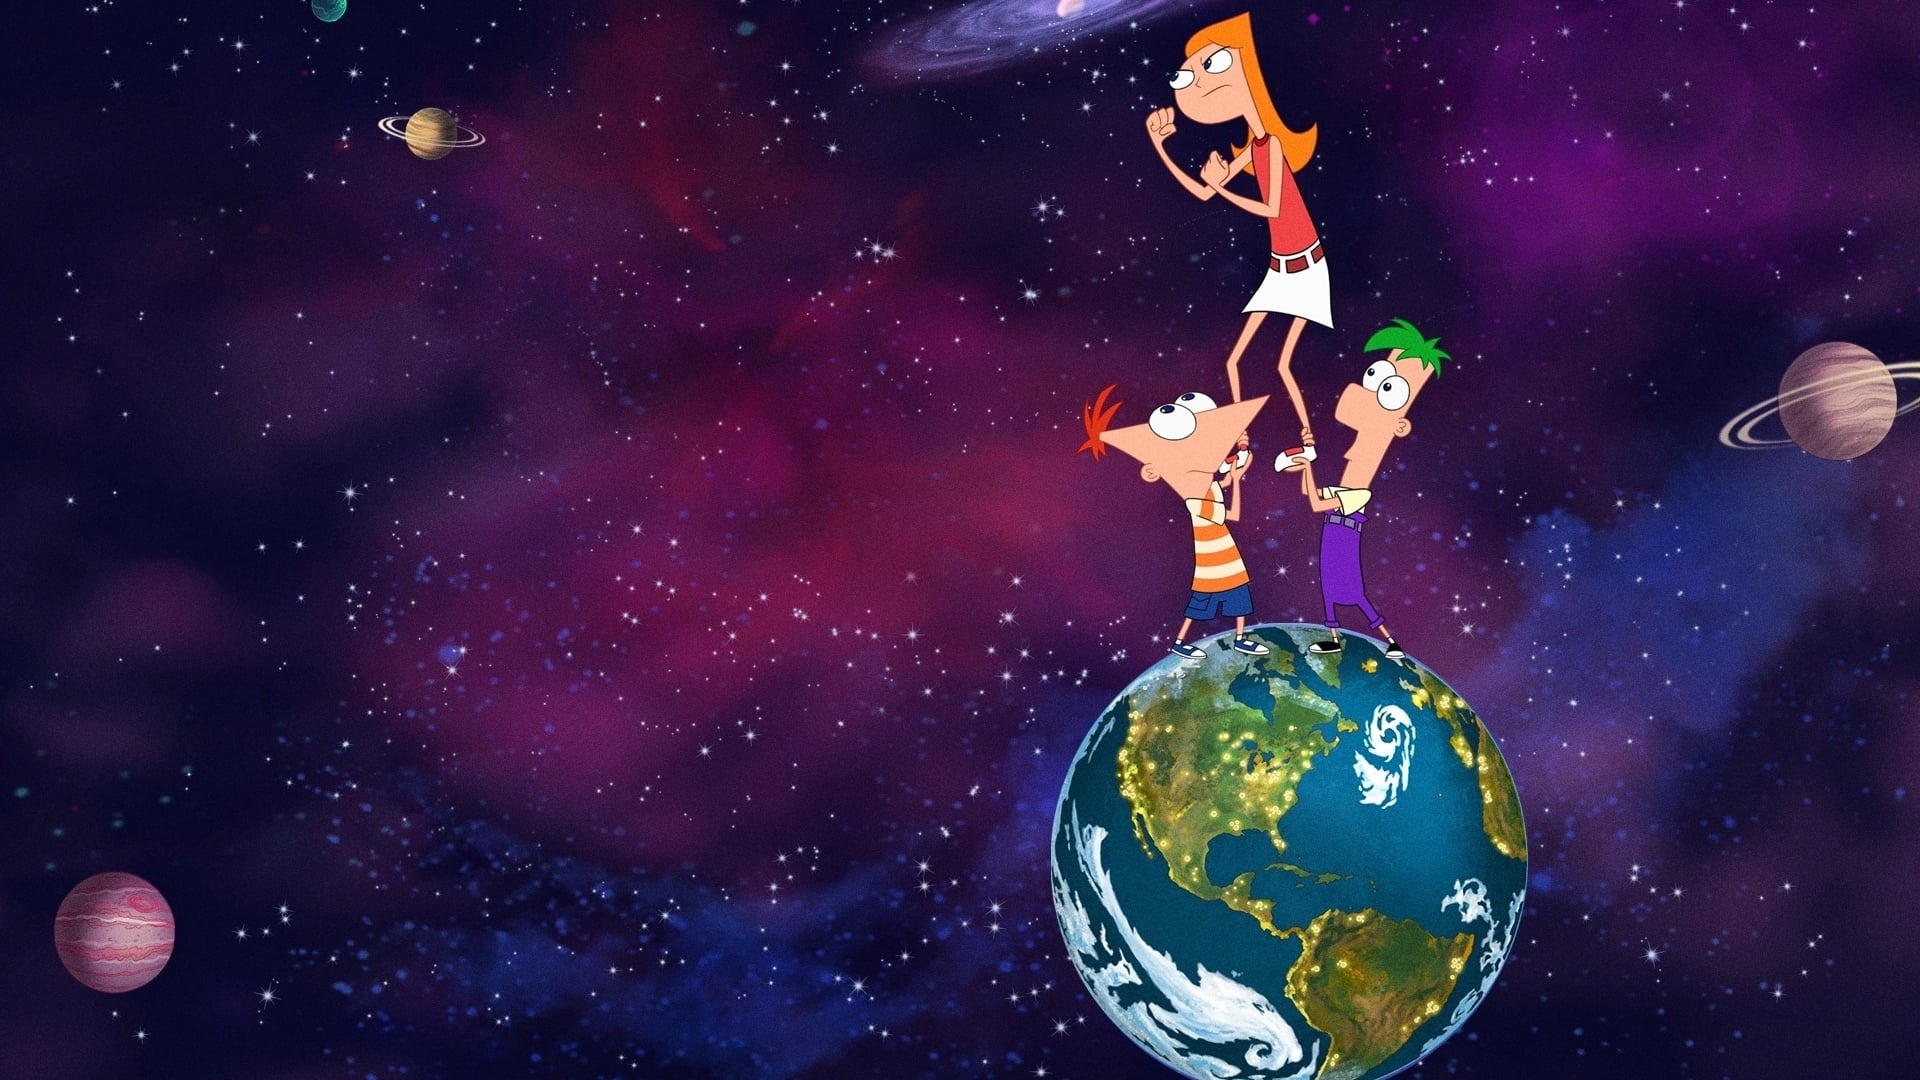 Phineas and Ferb the Movie, Candace Against the Universe, Animated film, Backdrops, 1920x1080 Full HD Desktop